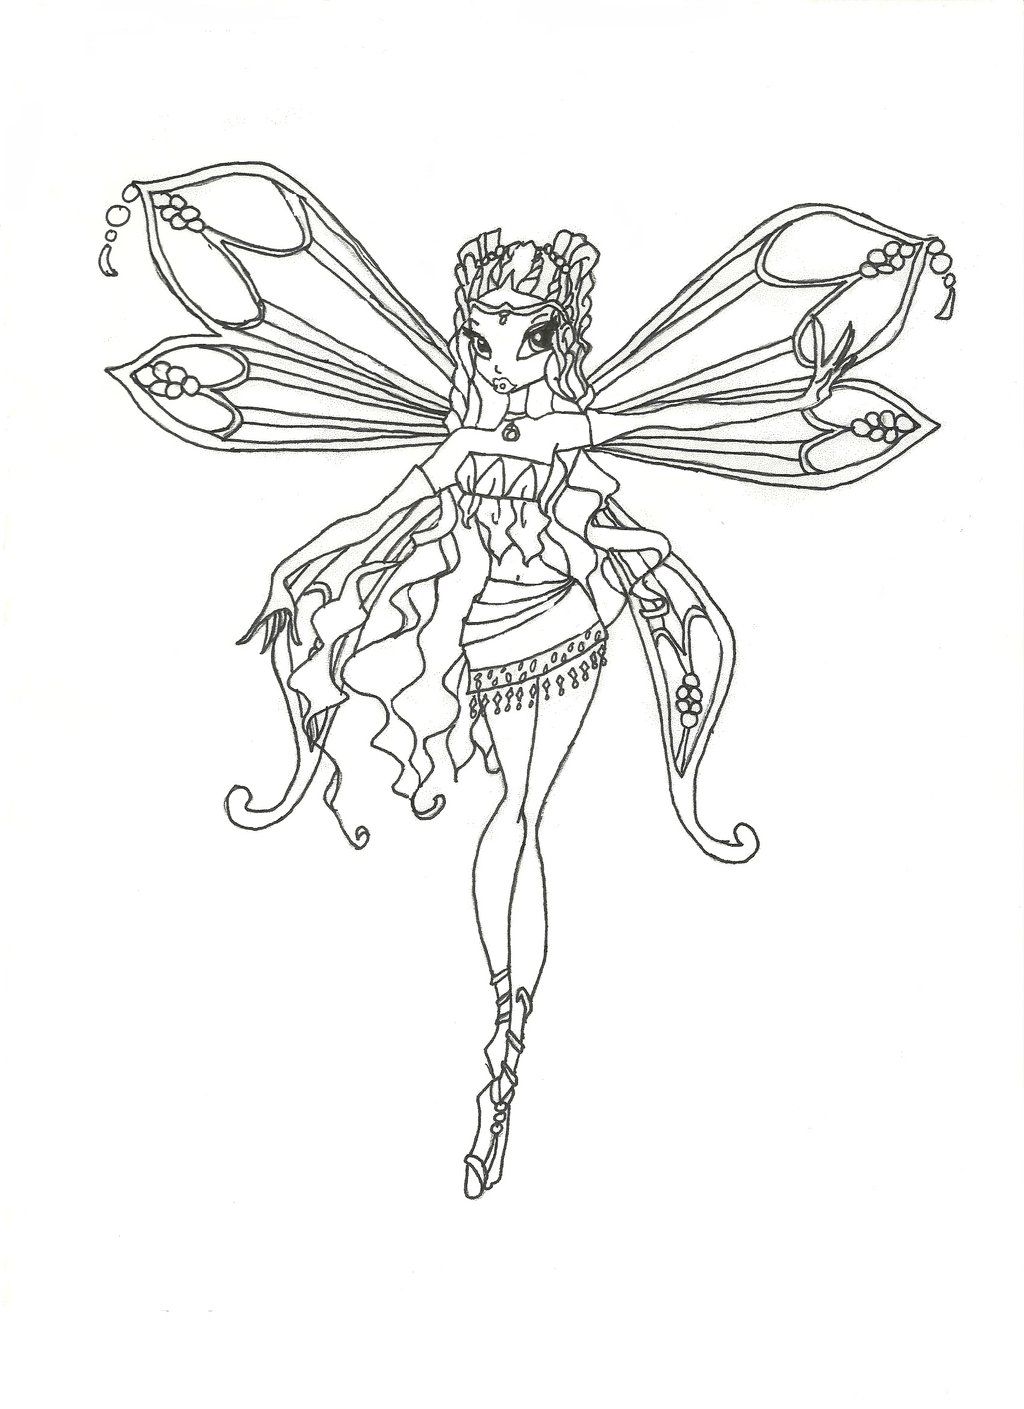 Winx club enchantix layla coloring book to print and online